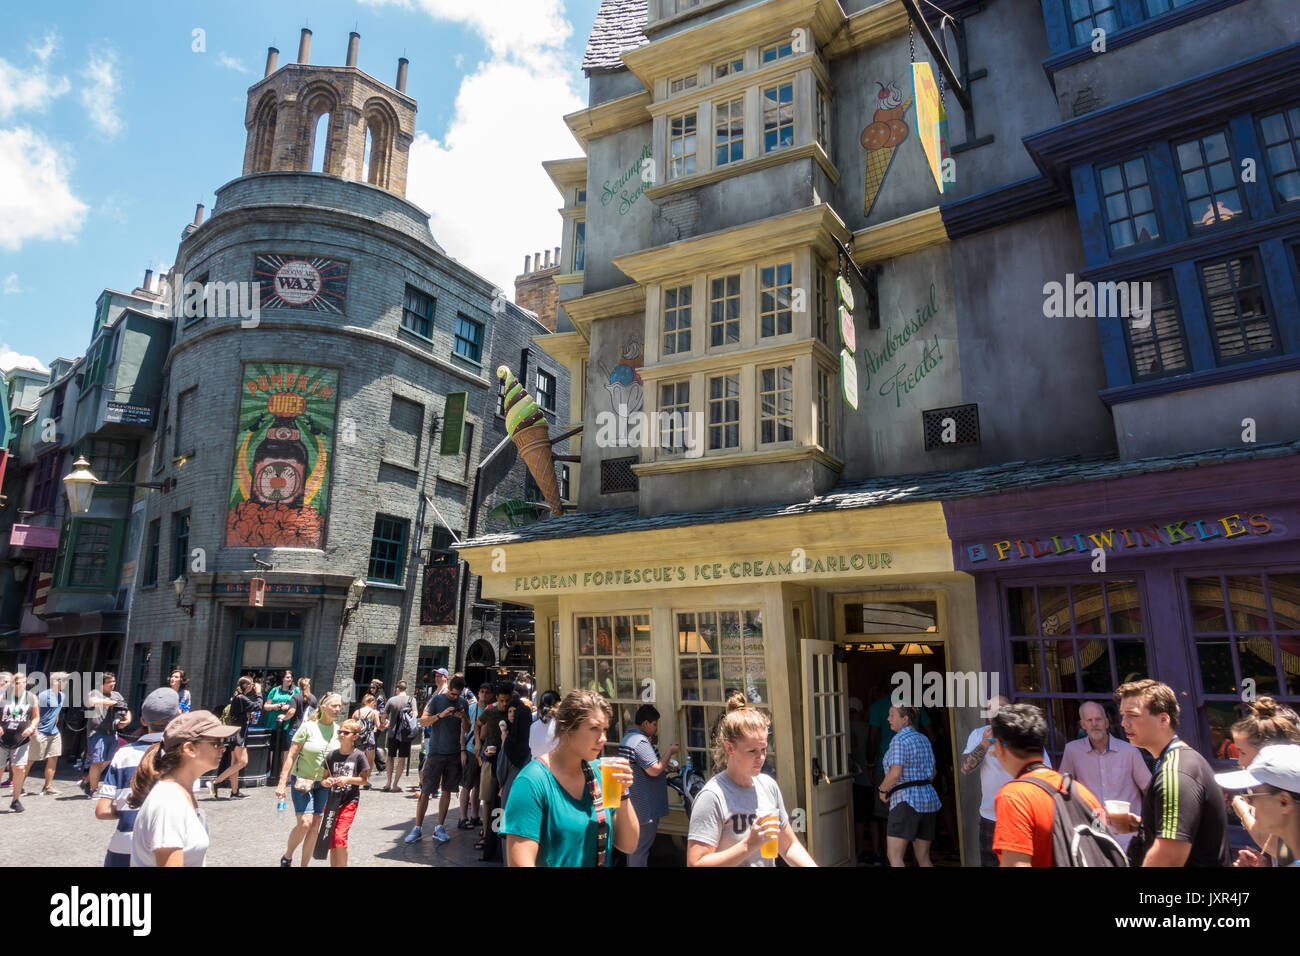 Diagon Alley in the Wizarding World of Harry Potter in Universal Studios Orlando, Florida. Stock Photo